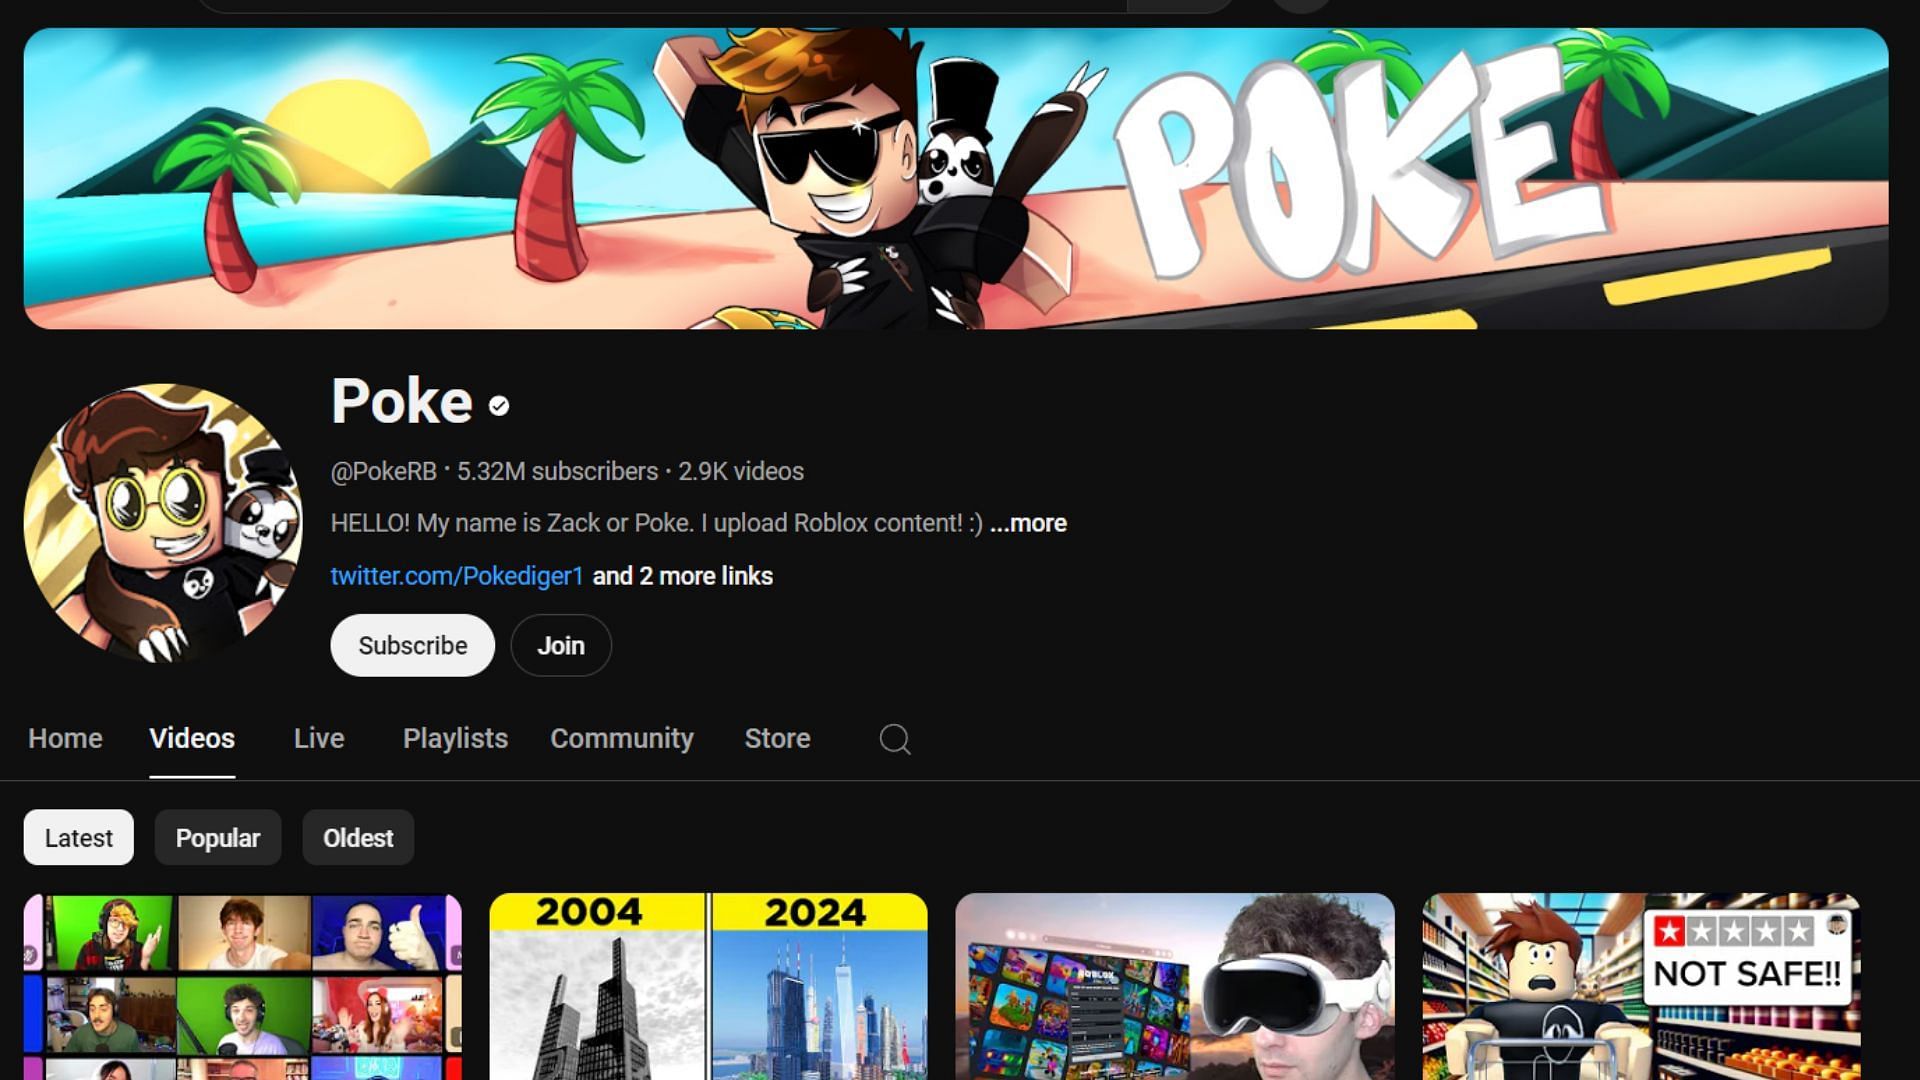 Poke&#039;s content is hilarious and engaging for the viewers (Image via YouTube/Poke)